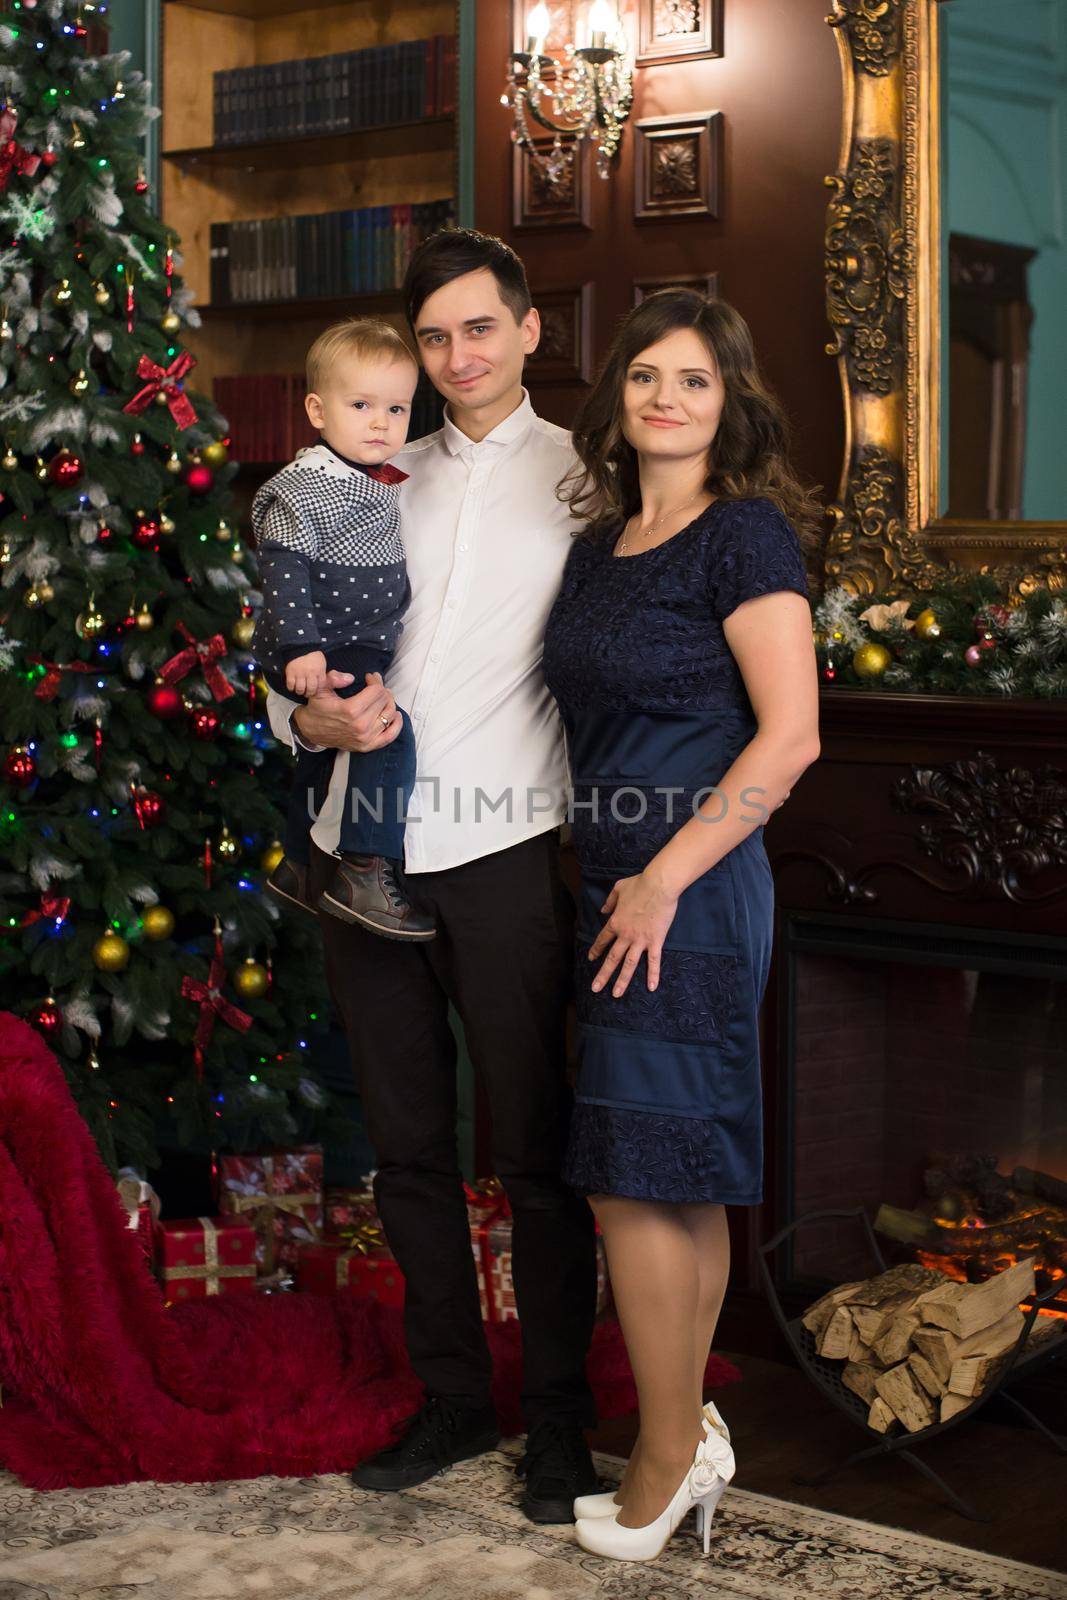 Family sitting together in a Christmas interior. Happy family have fun with Christmas gifts. Christmas family portrait, mother, father and son celebrate the occasion.